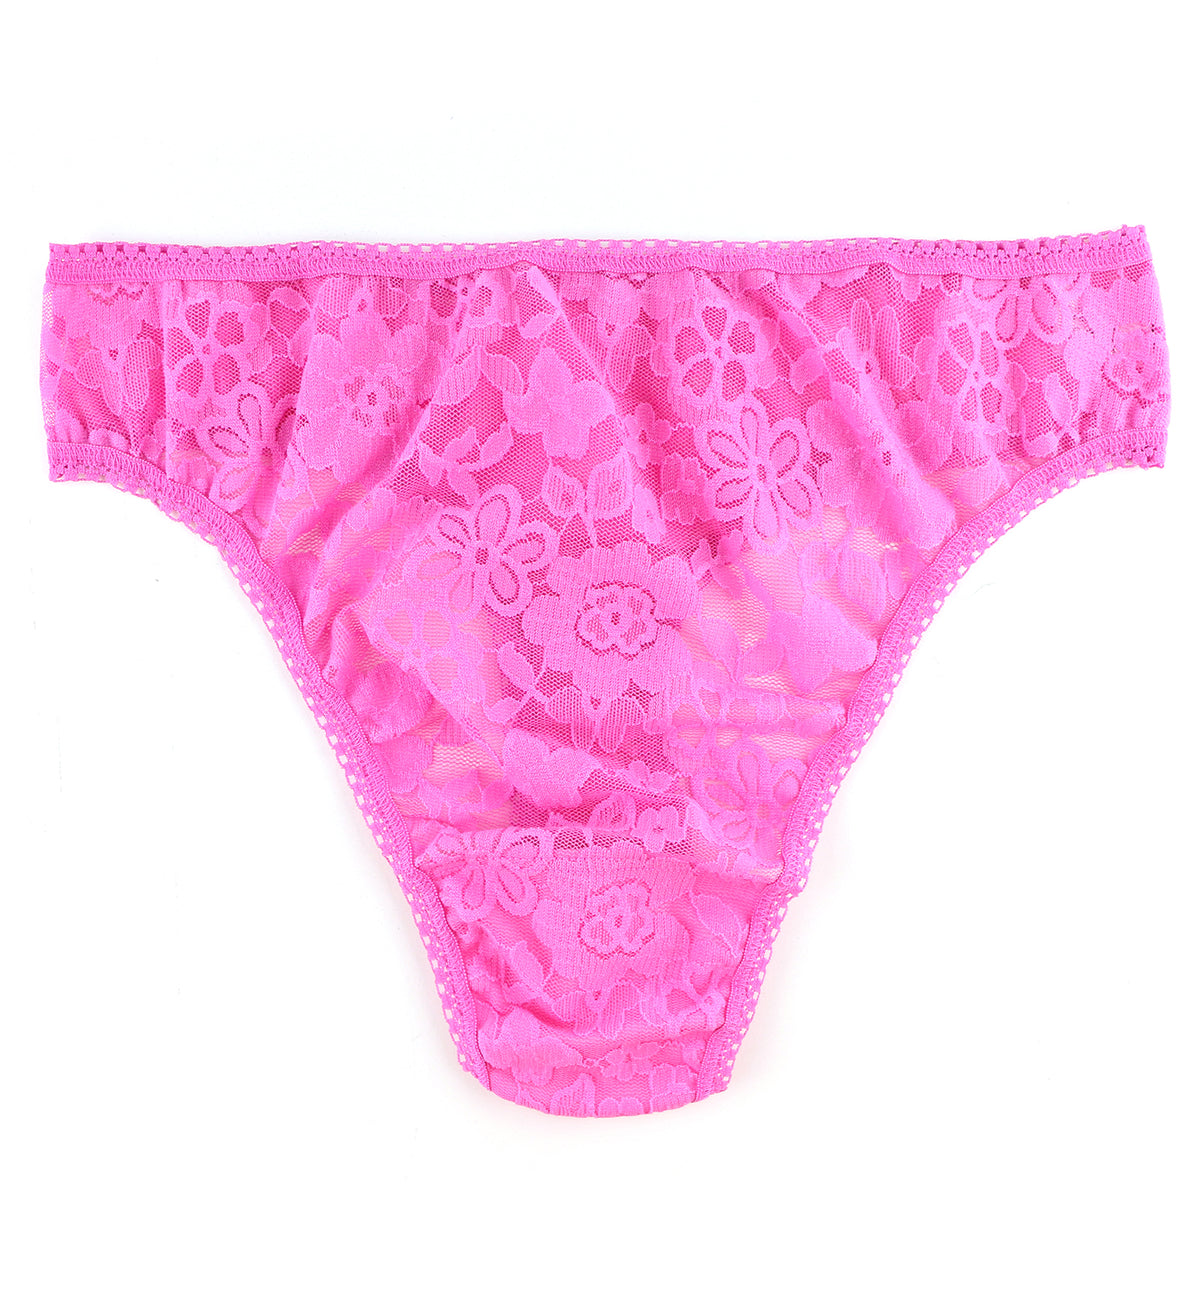 Hanky Panky Daily Lace High Cut Thong (771851),XS,Dream House Pink - Dream House Pink,XS